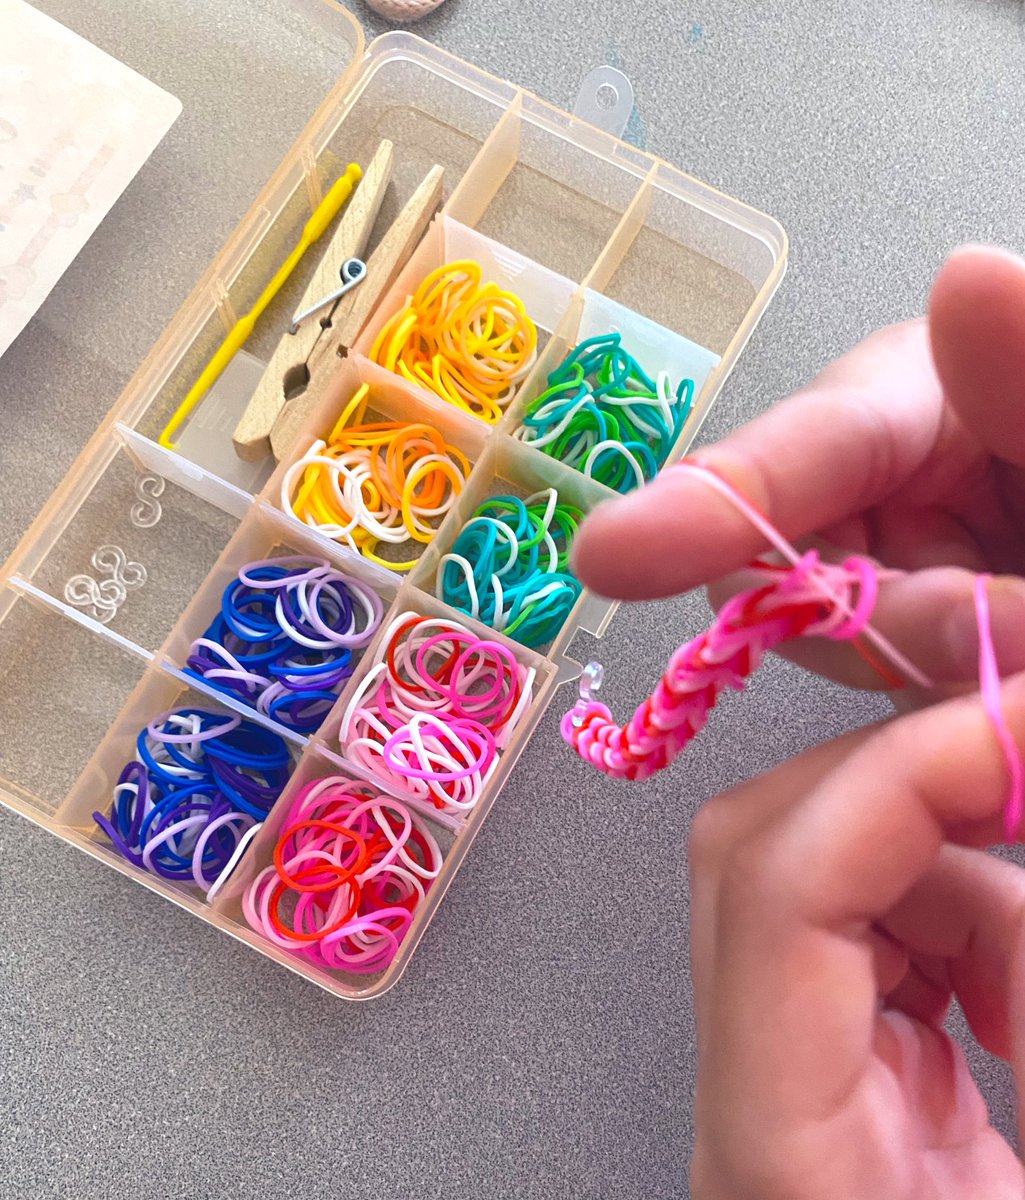 🌈 Friendship Bracelet Club 🌈 Today was the first day of our new club. The kids were very excited to make their first type of bracelet! @AZTeaches @ms_alexiou